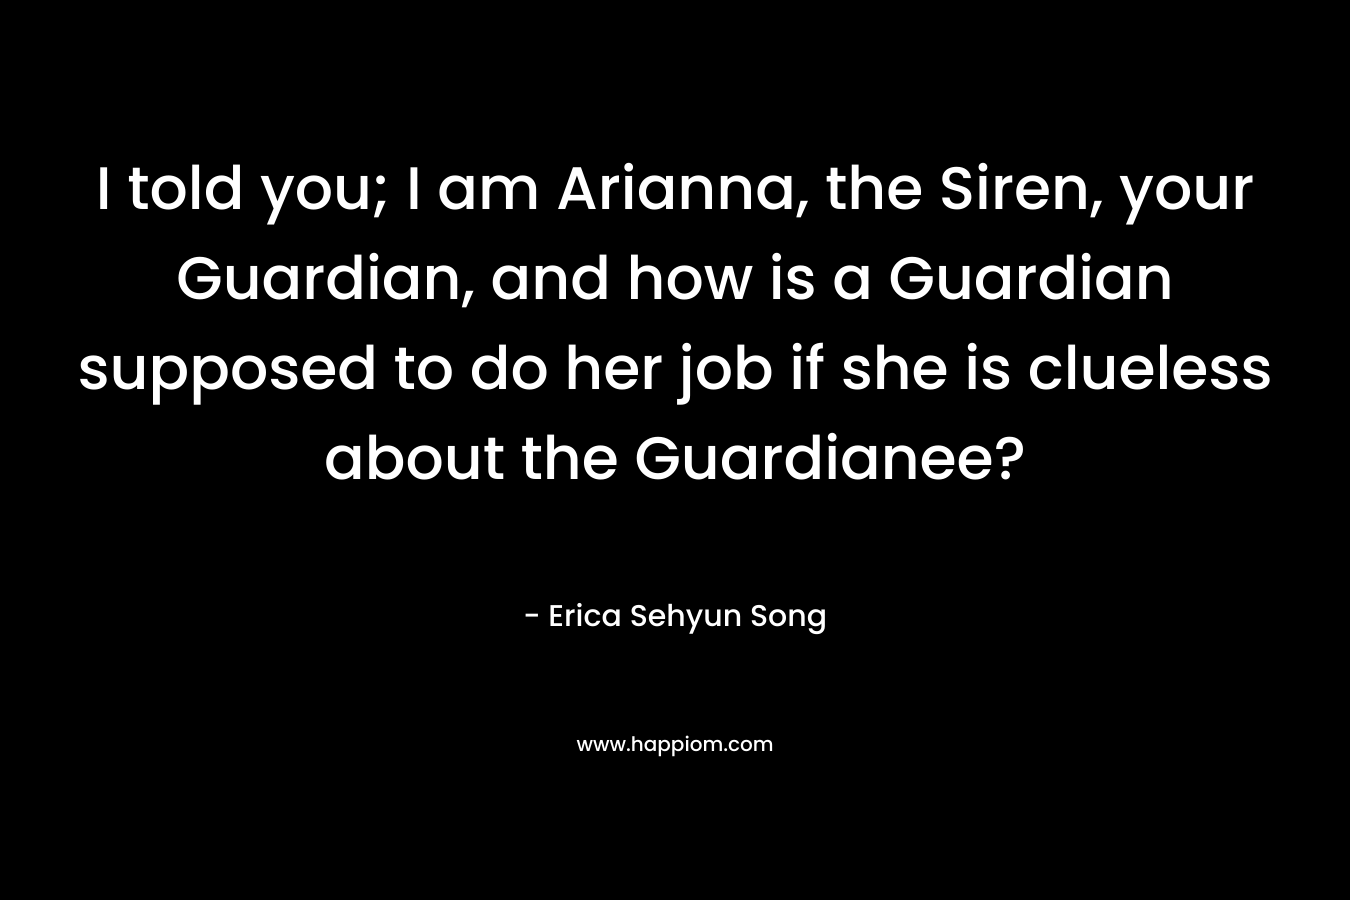 I told you; I am Arianna, the Siren, your Guardian, and how is a Guardian supposed to do her job if she is clueless about the Guardianee? – Erica Sehyun Song